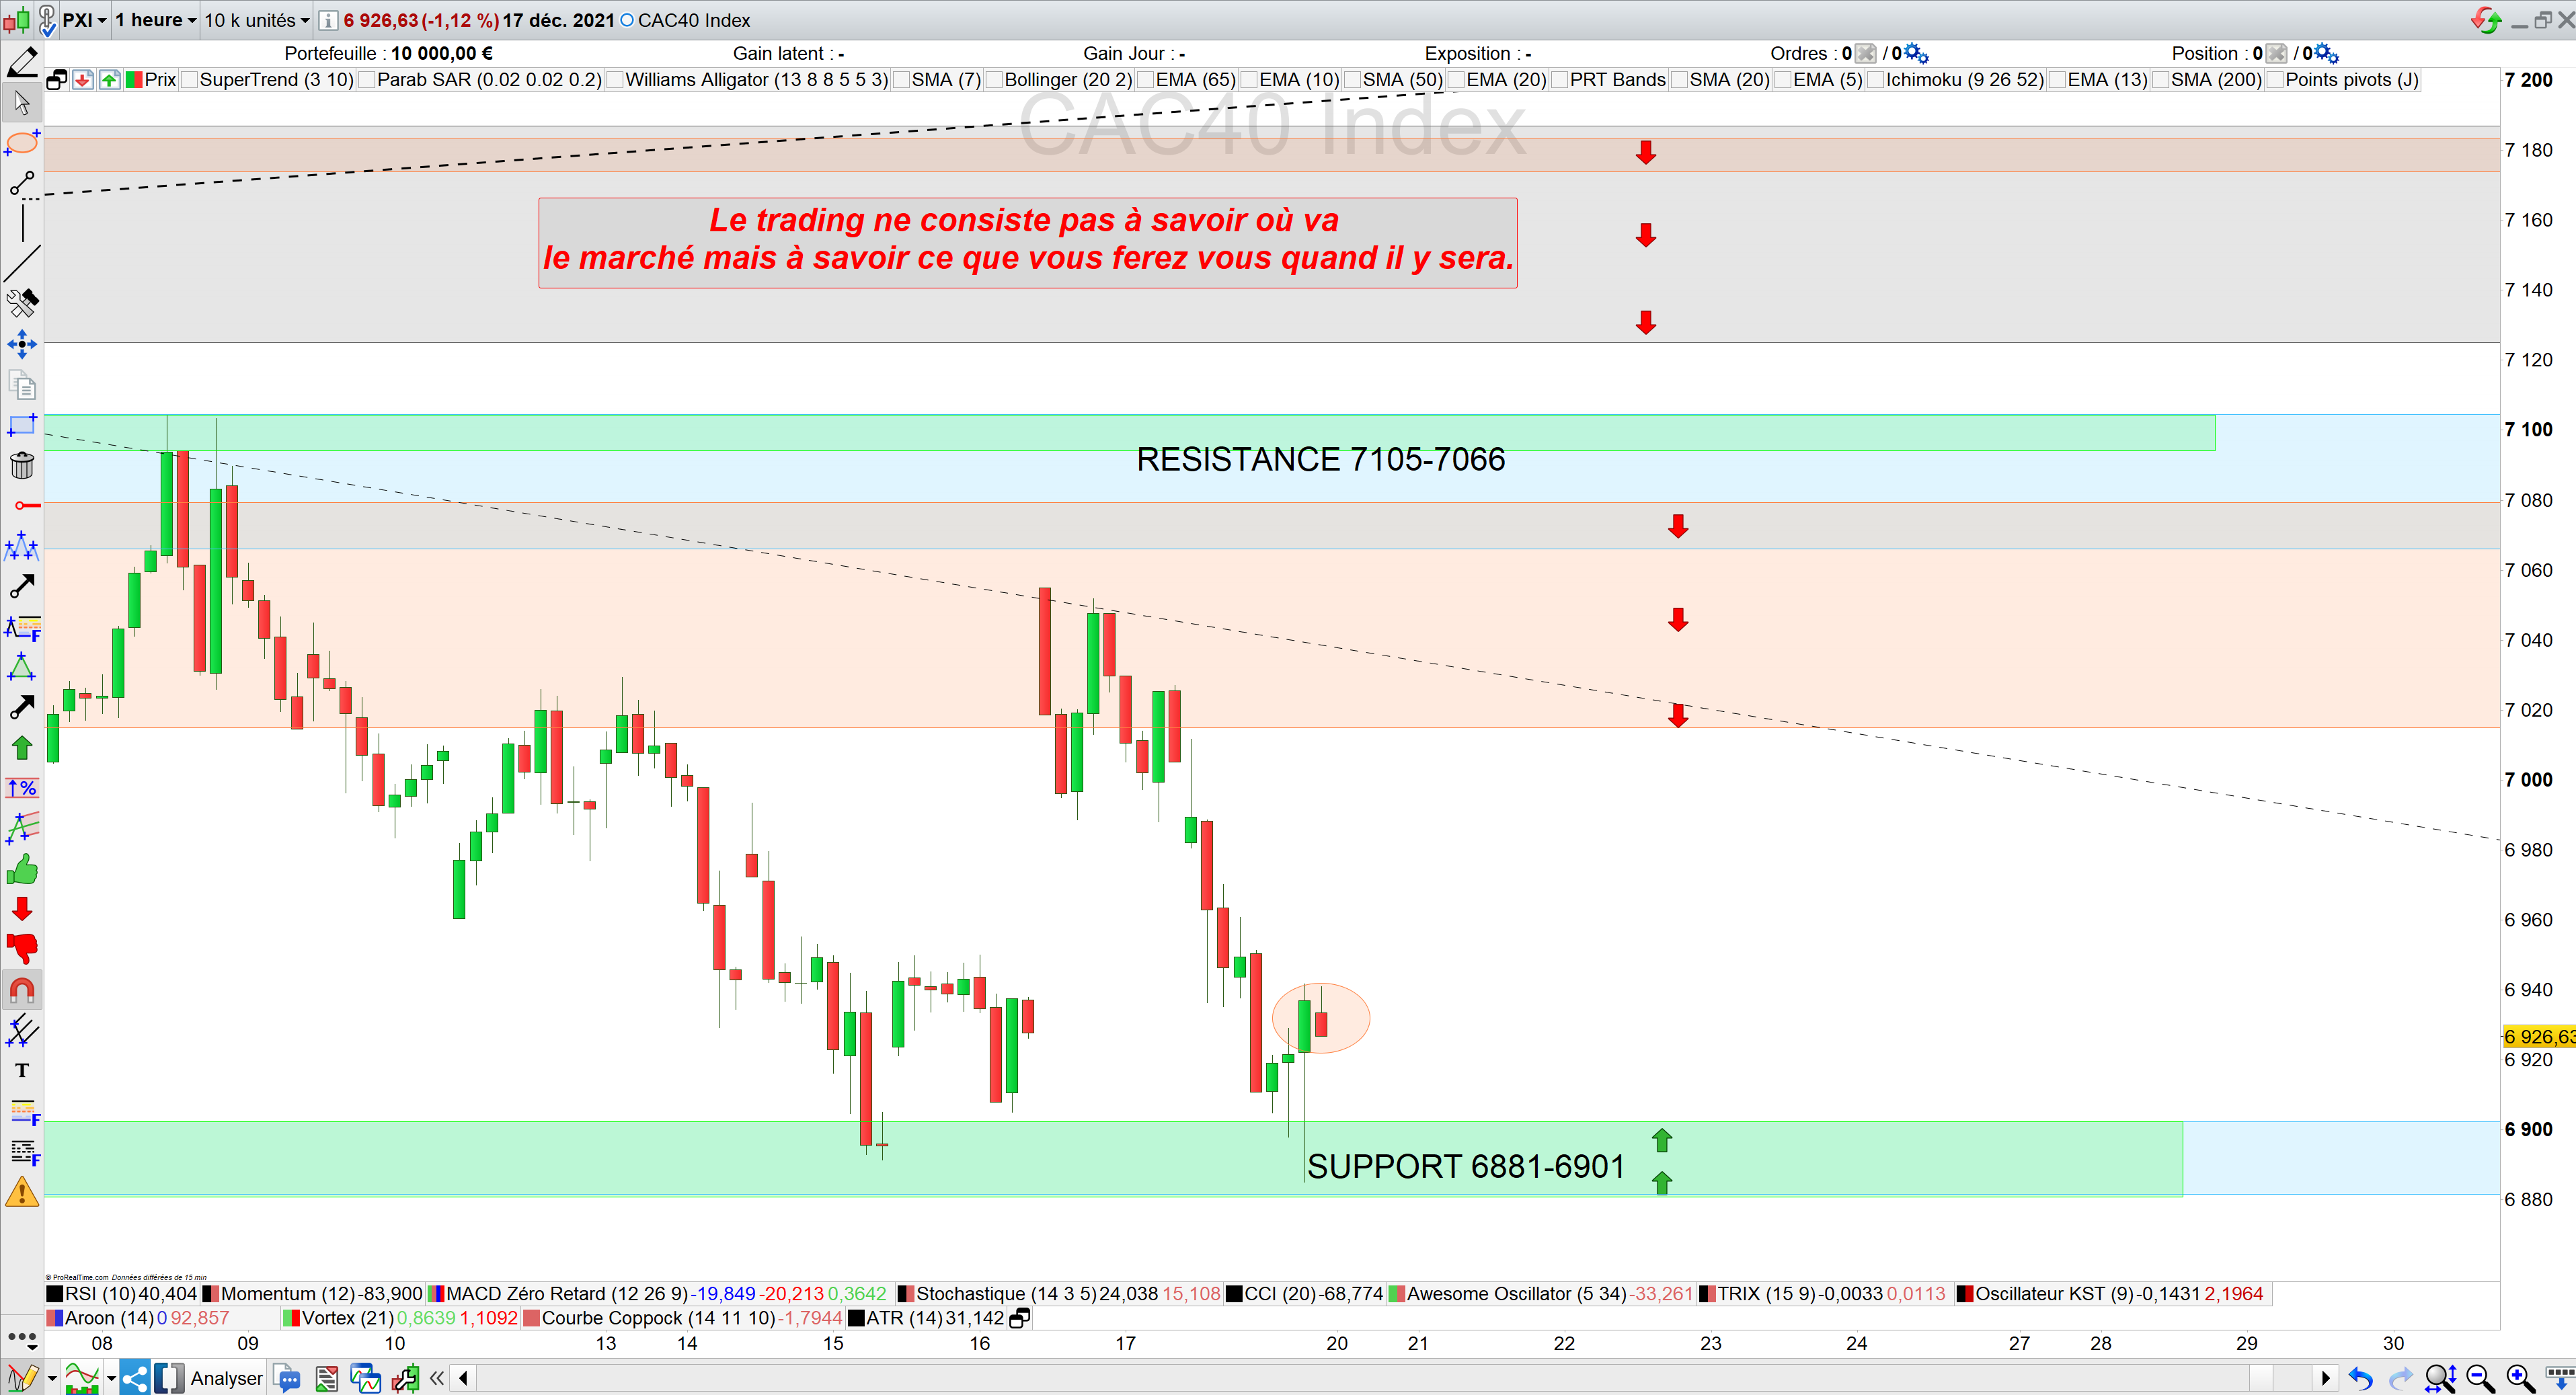 Trading cac40 20/12/21